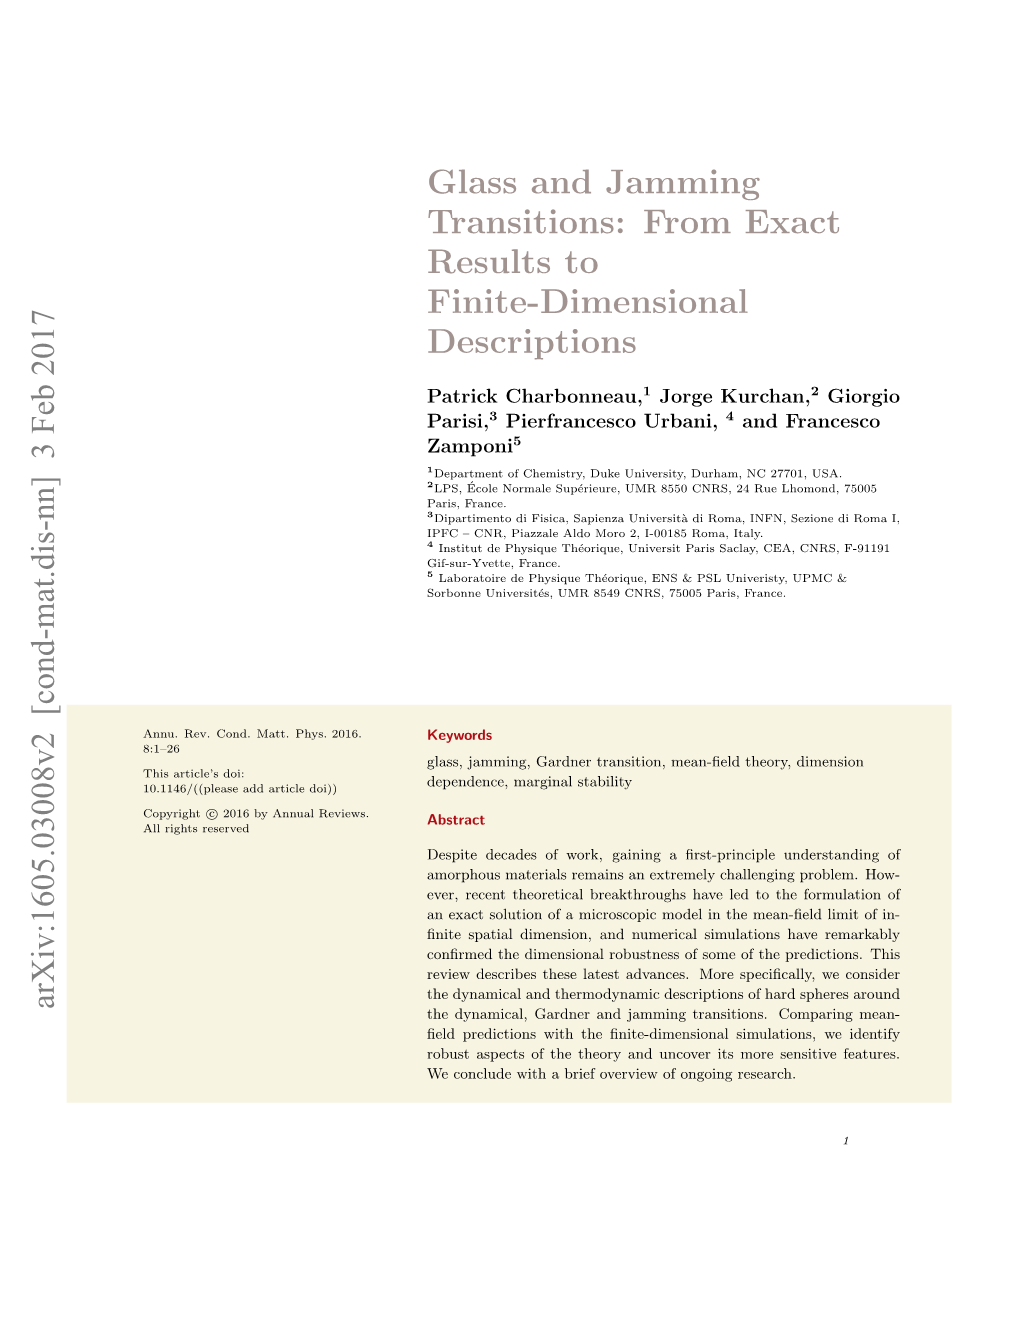 Glass and Jamming Transitions: from Exact Results to Finite-Dimensional Descriptions